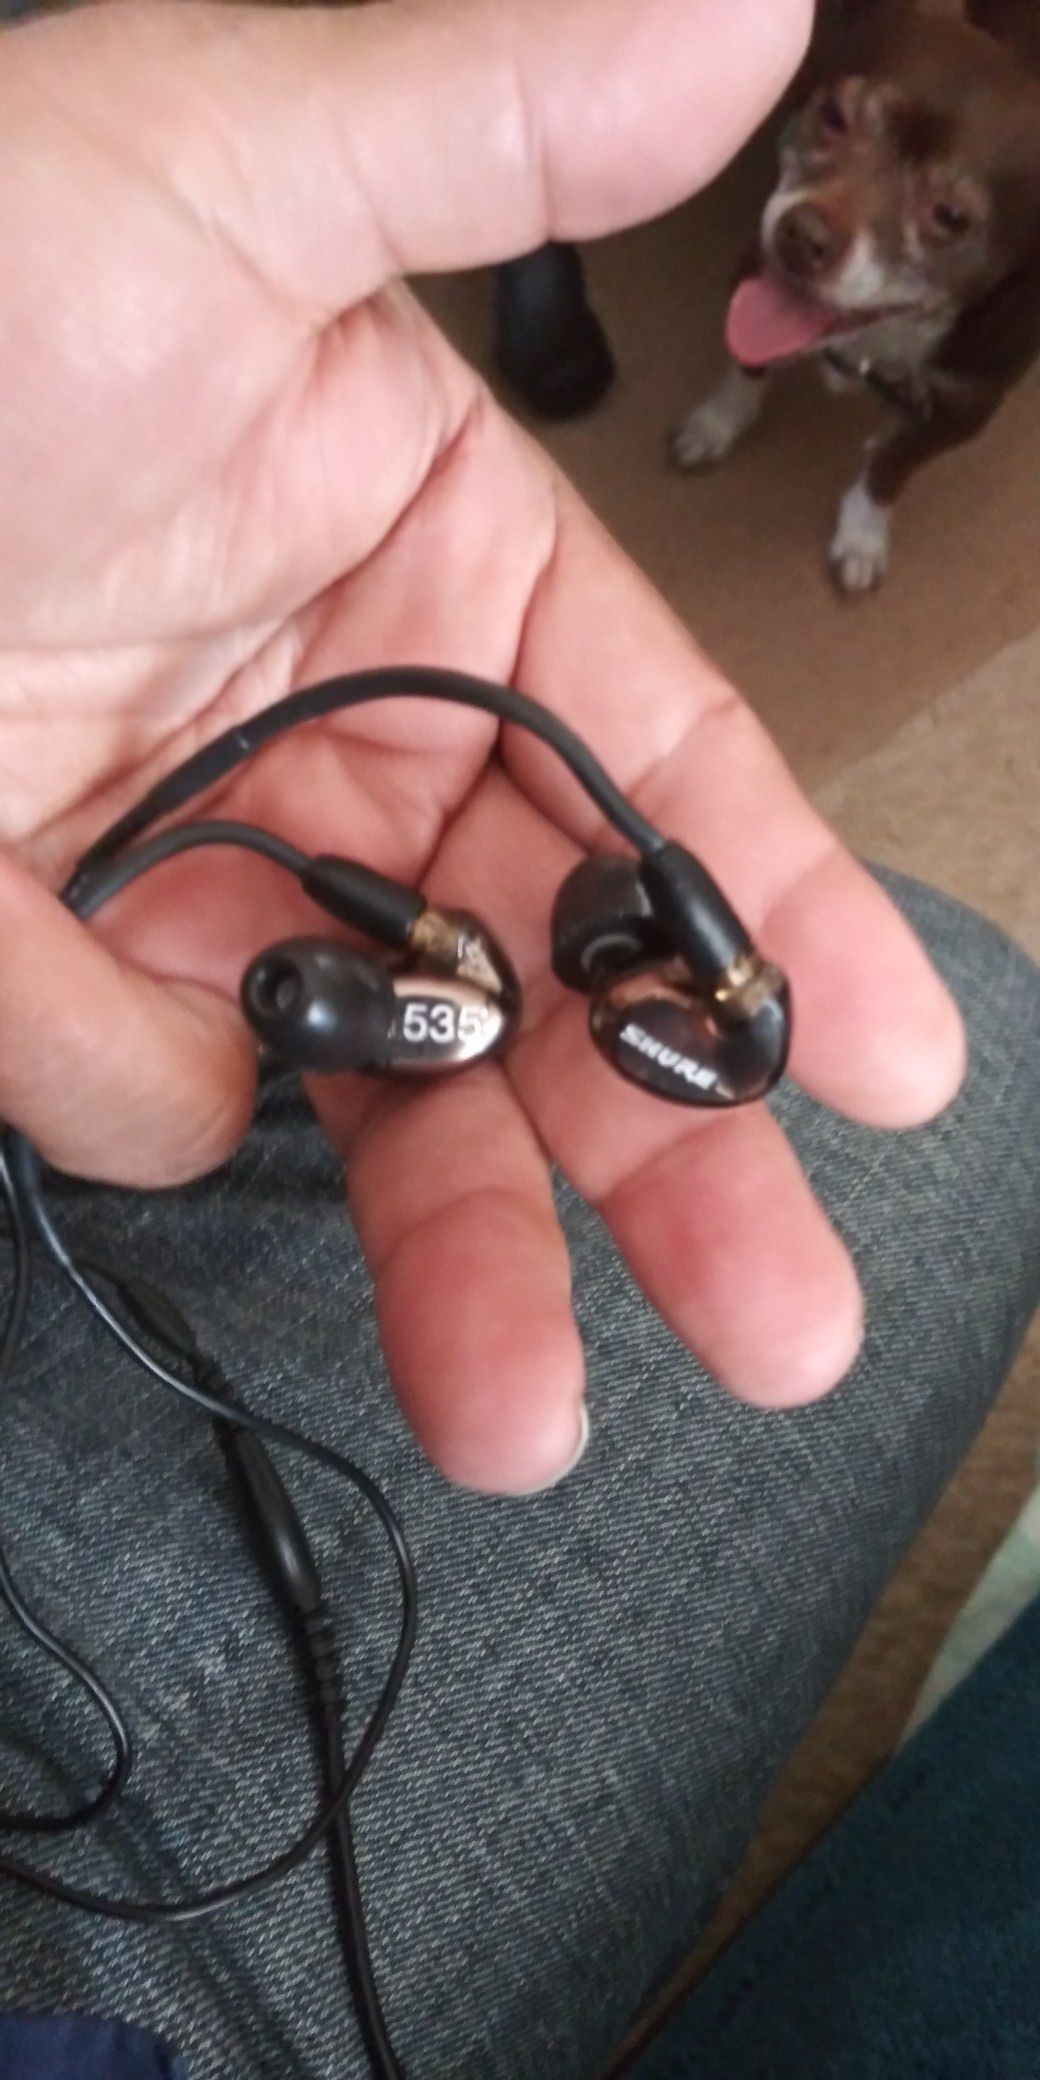 Sony cordless or corded professional earbuds